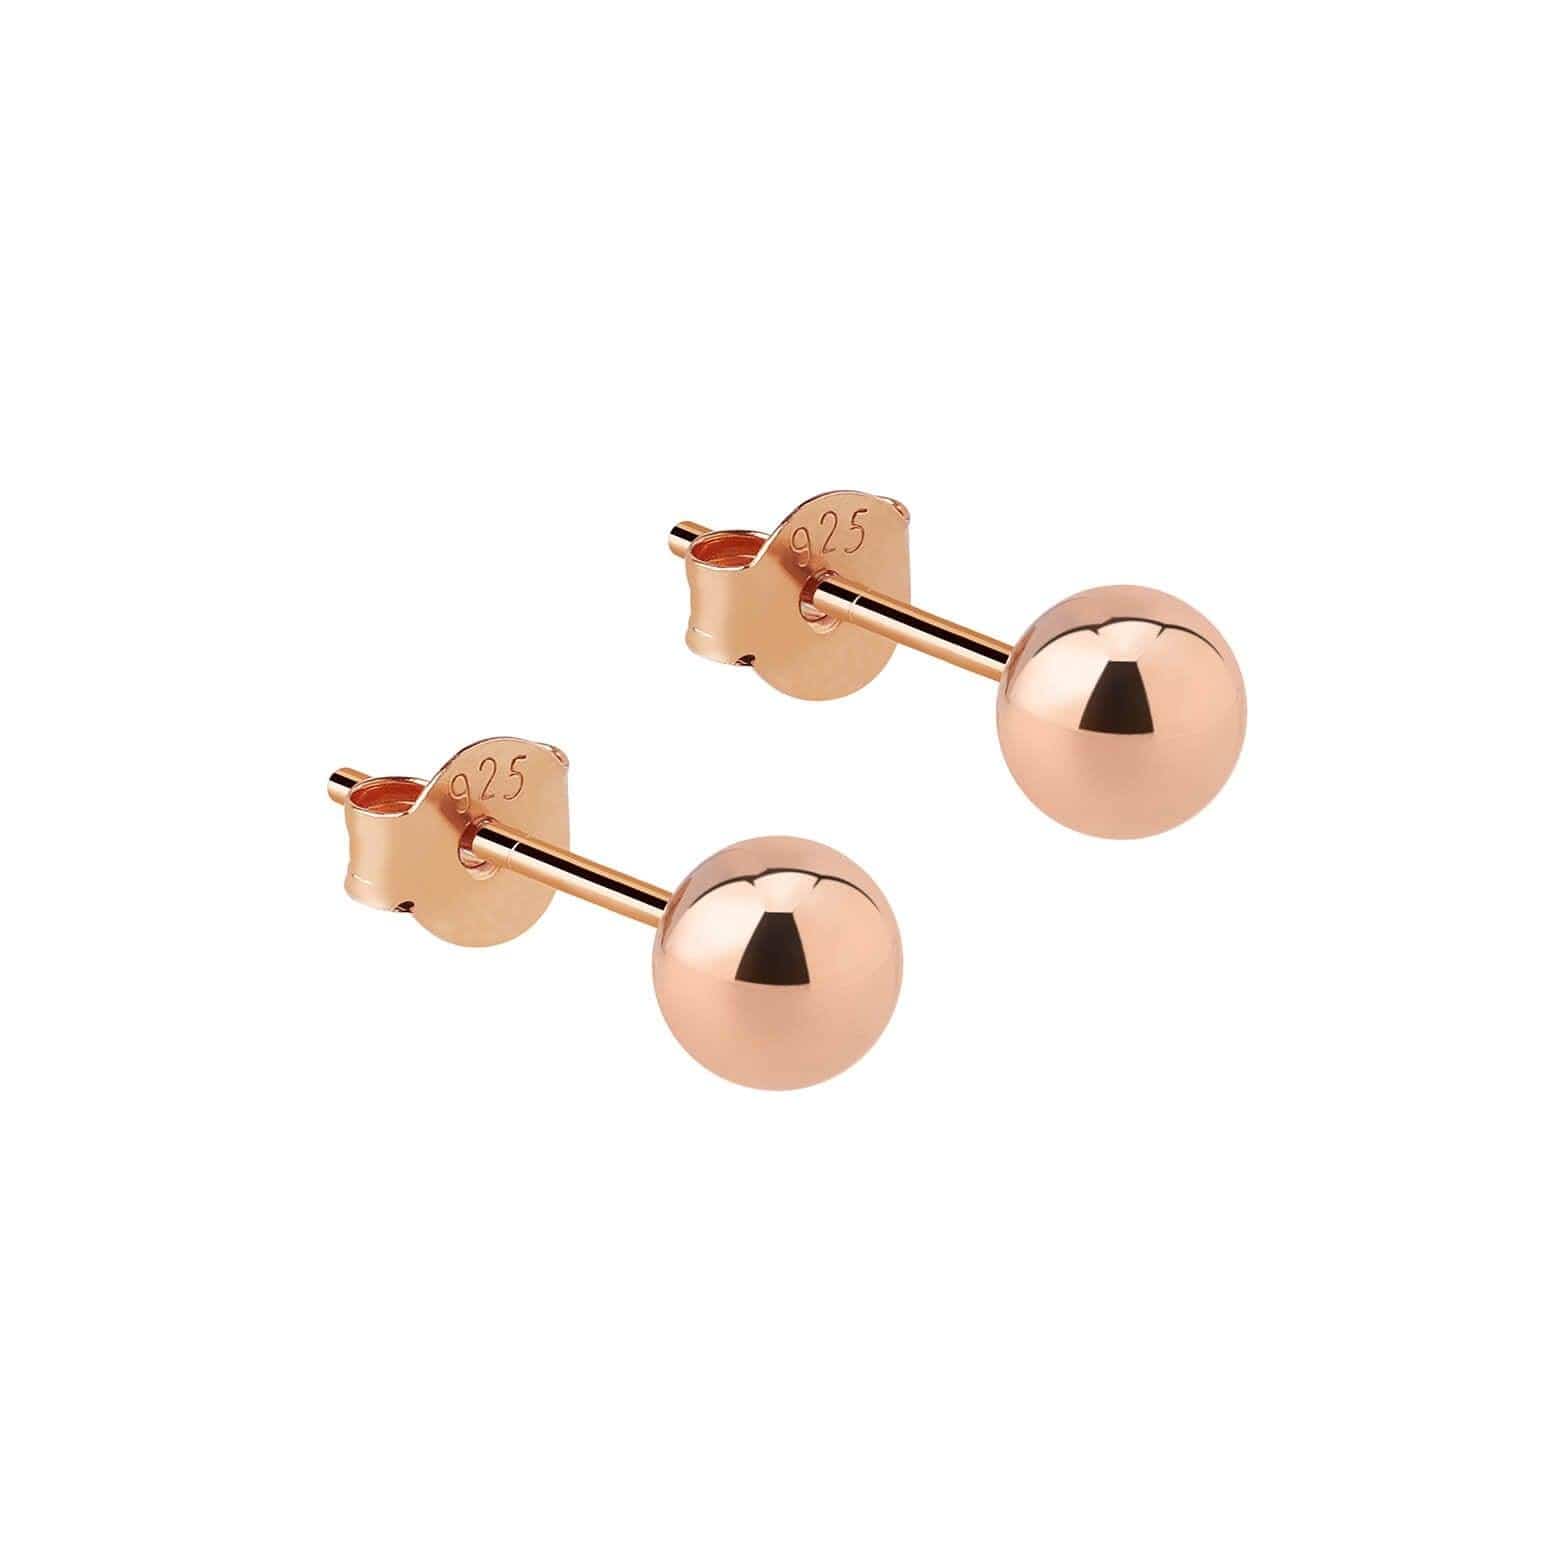 7mm classic stud earring rose gold plated